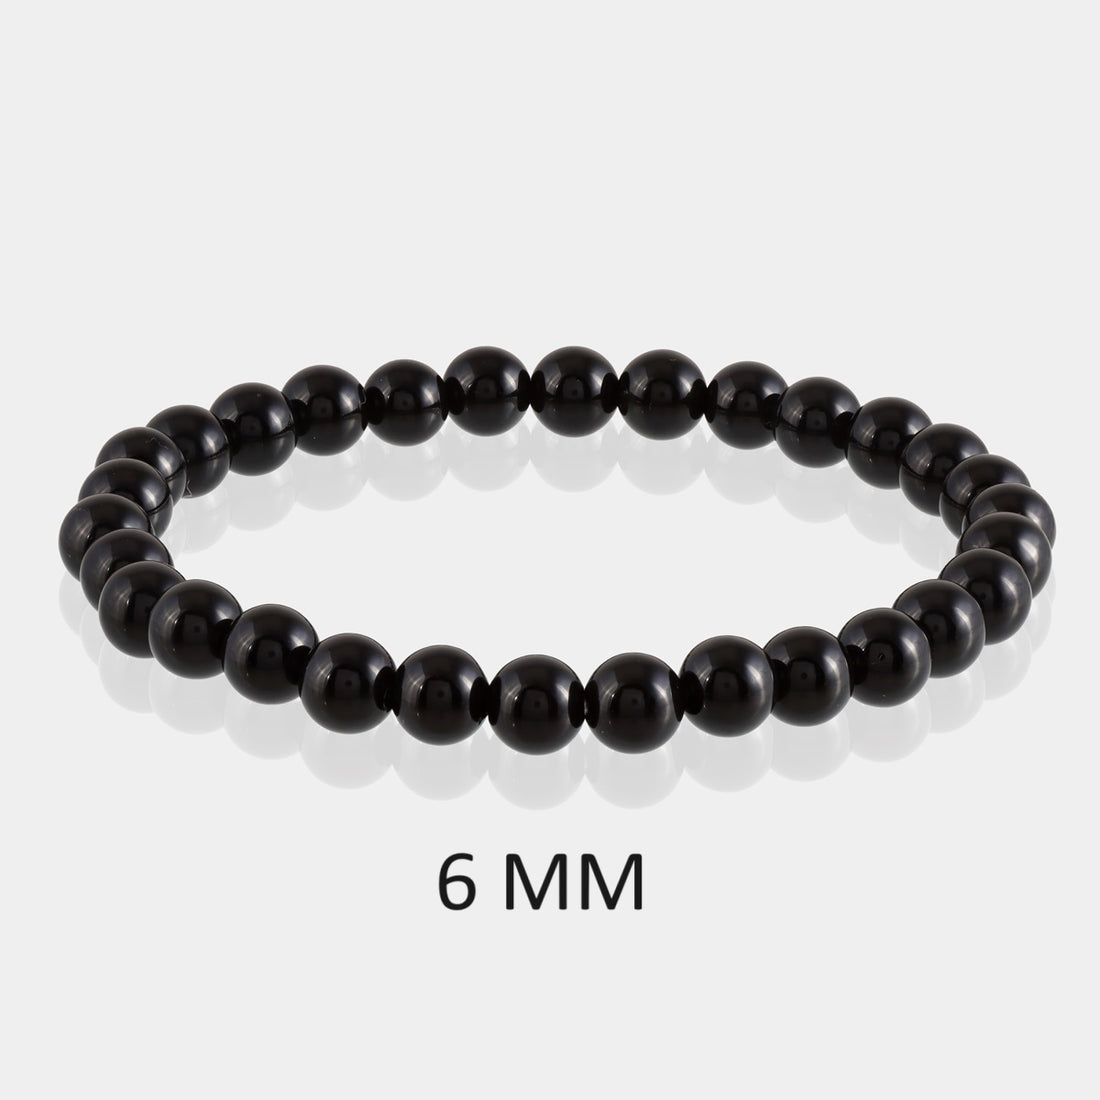 Symbolic image representing the protective qualities of Black Tourmaline, shielding against negativity, portrayed elegantly in the bracelet